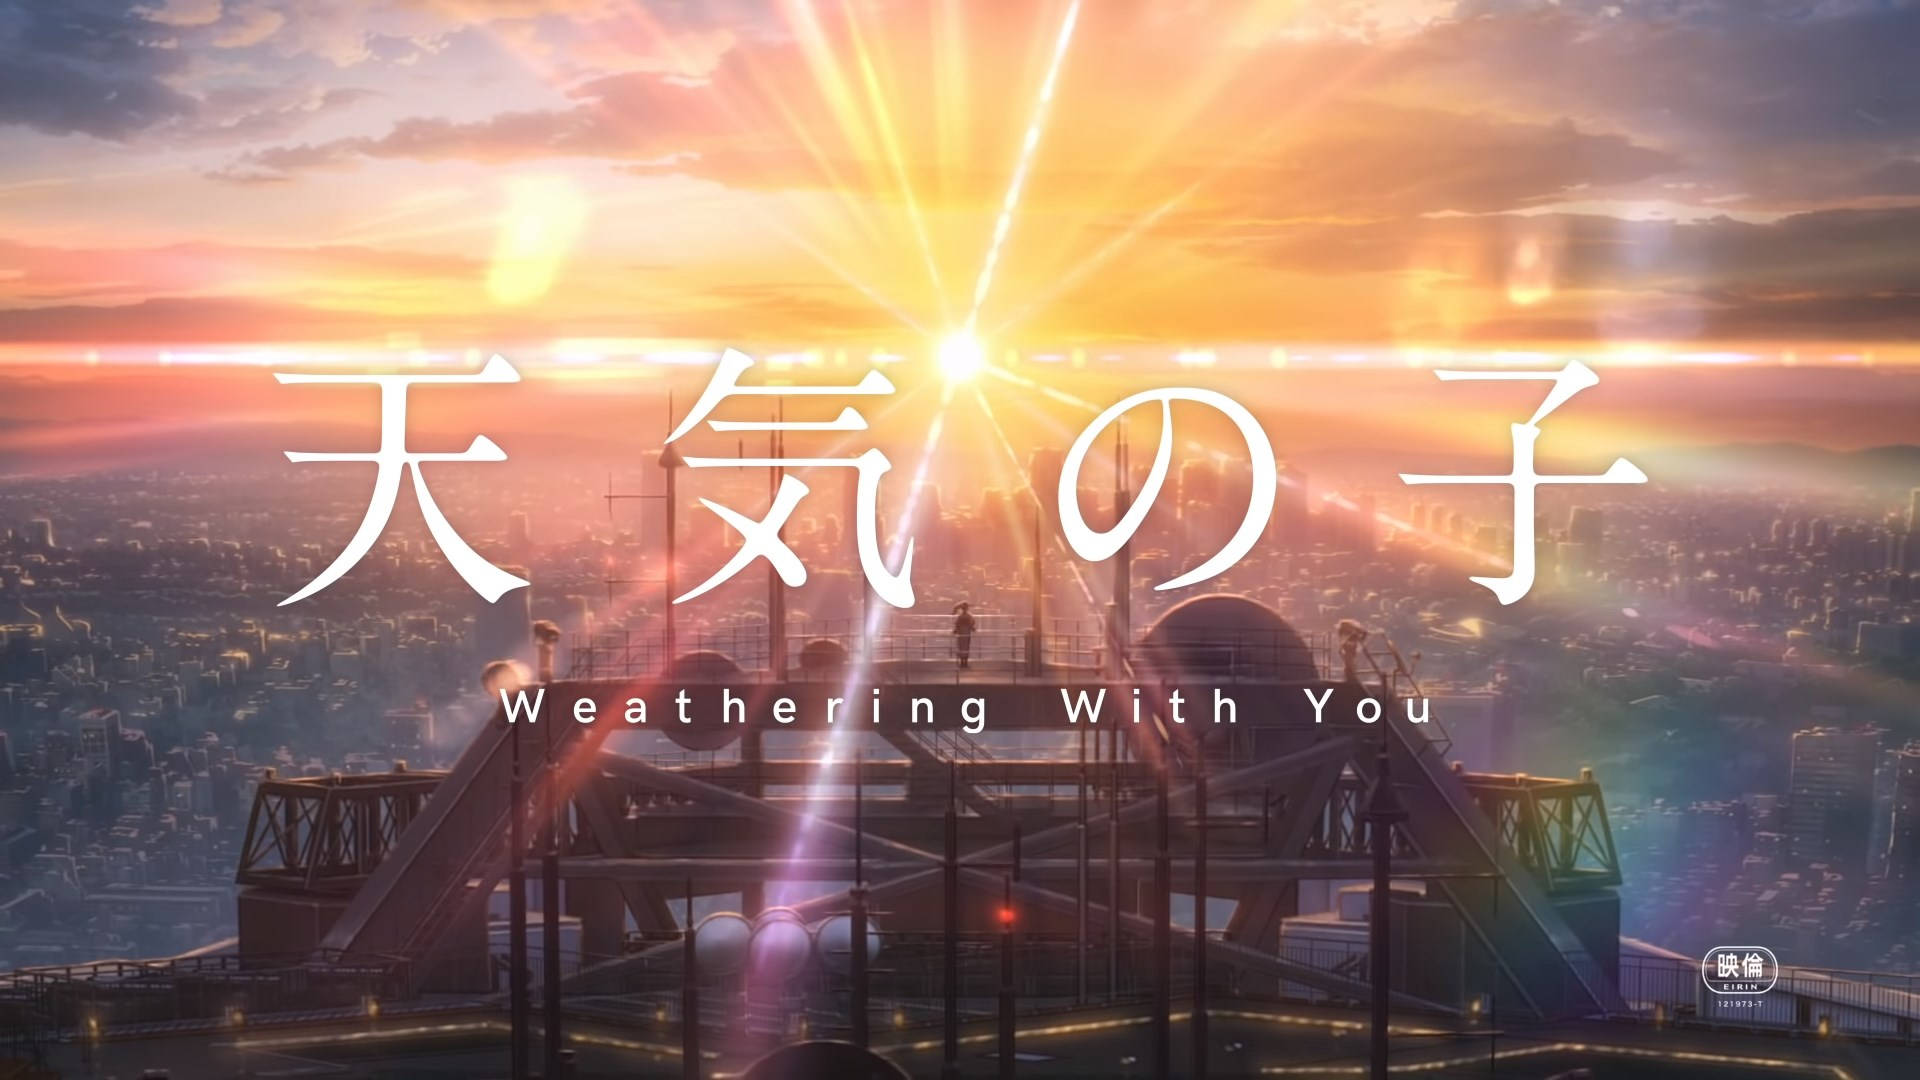 Weathering With You Sunset Poster Wallpaper